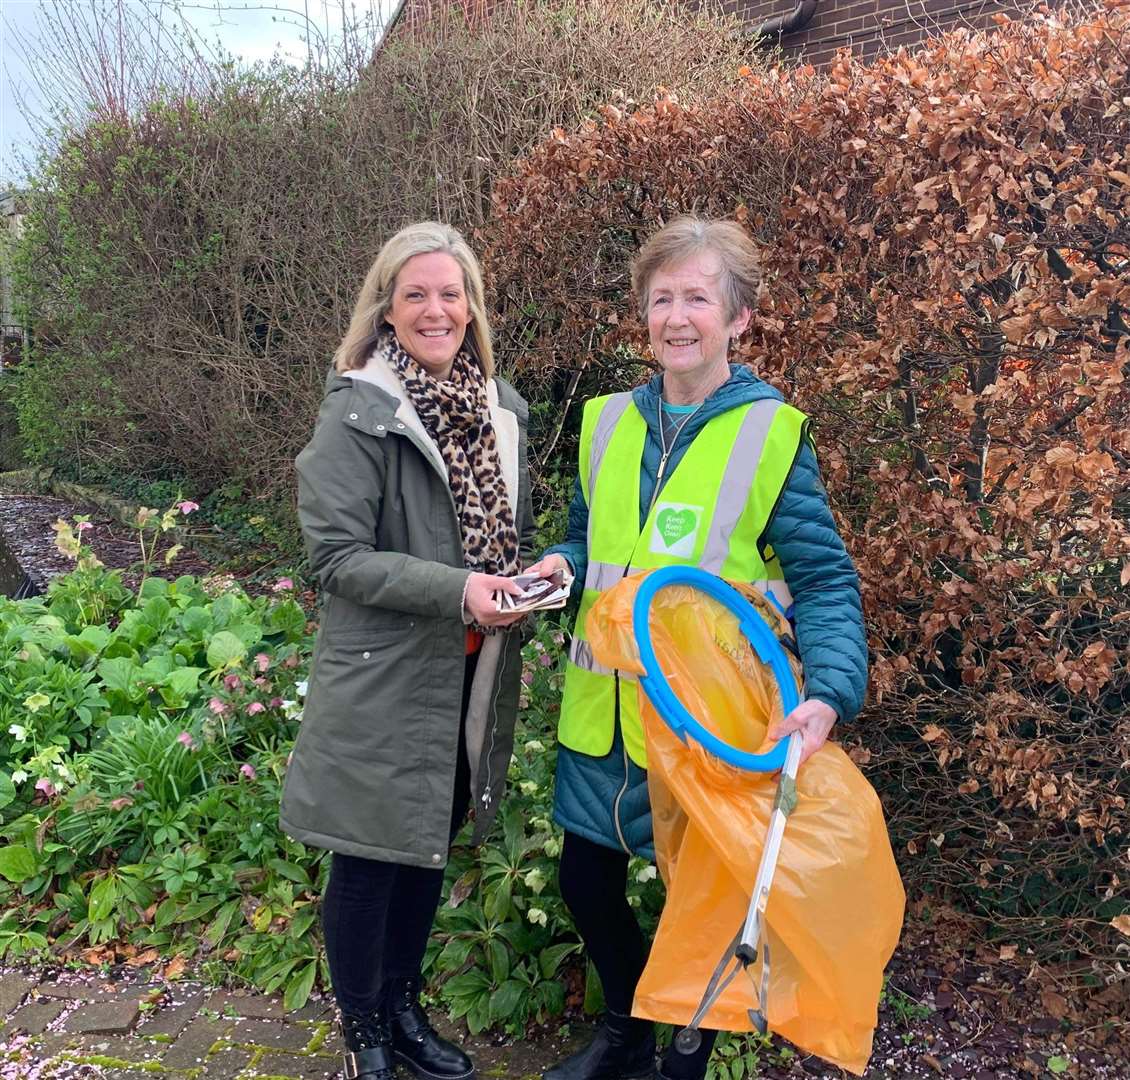 Litter picker Sheila Gibson found Jean McNeilly's long lost scan photos and handbag in undergrowth in Downs Road, Istead Rise. Photo credit: Jean McNeilly